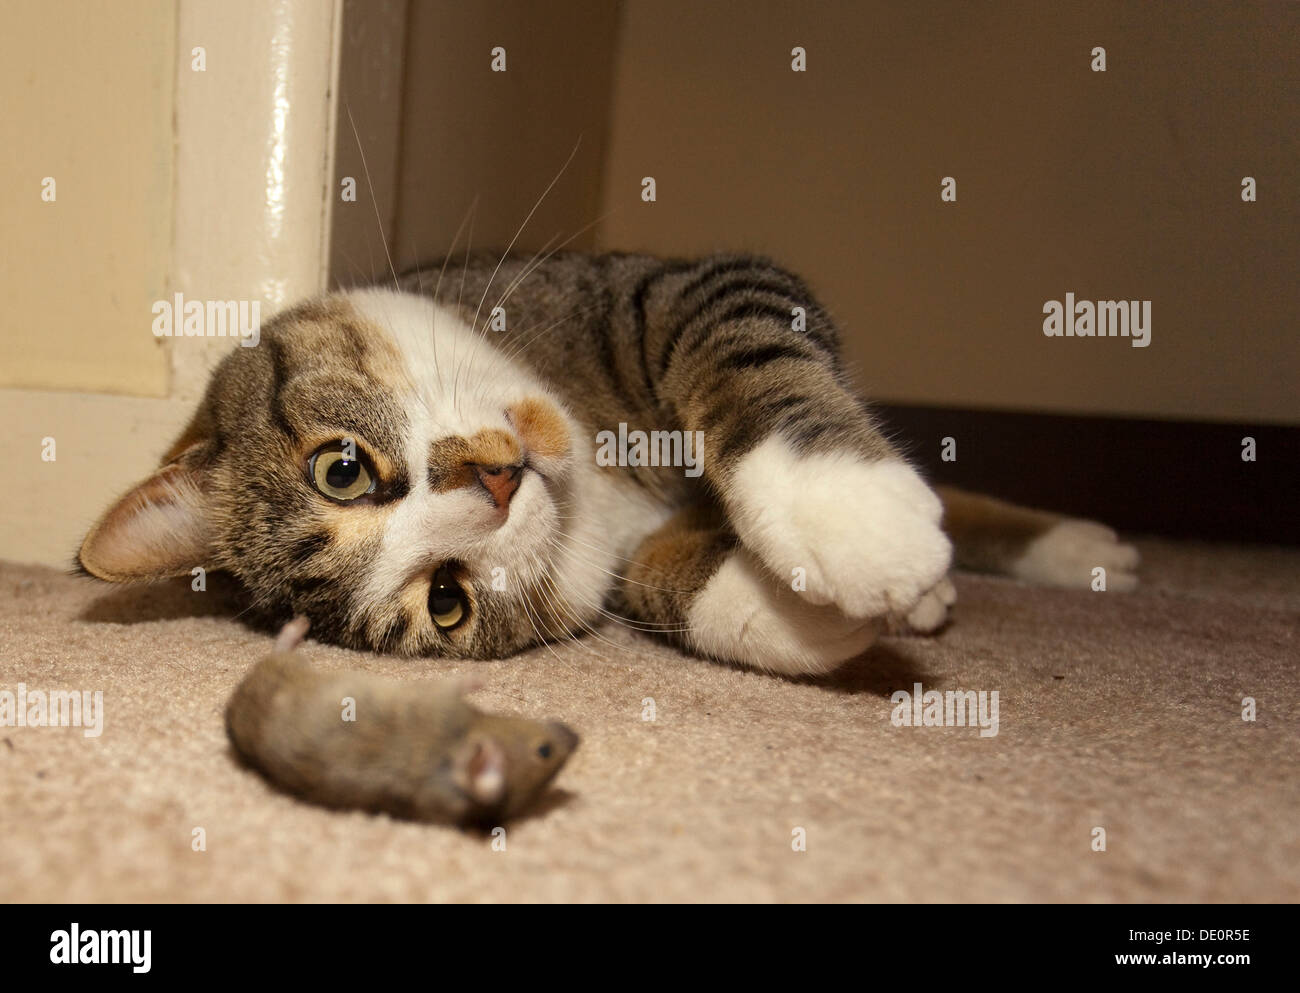 Domestic cat, housecat (Felis catus), catches, plays with Common house mouse (Mus musculus) Stock Photo